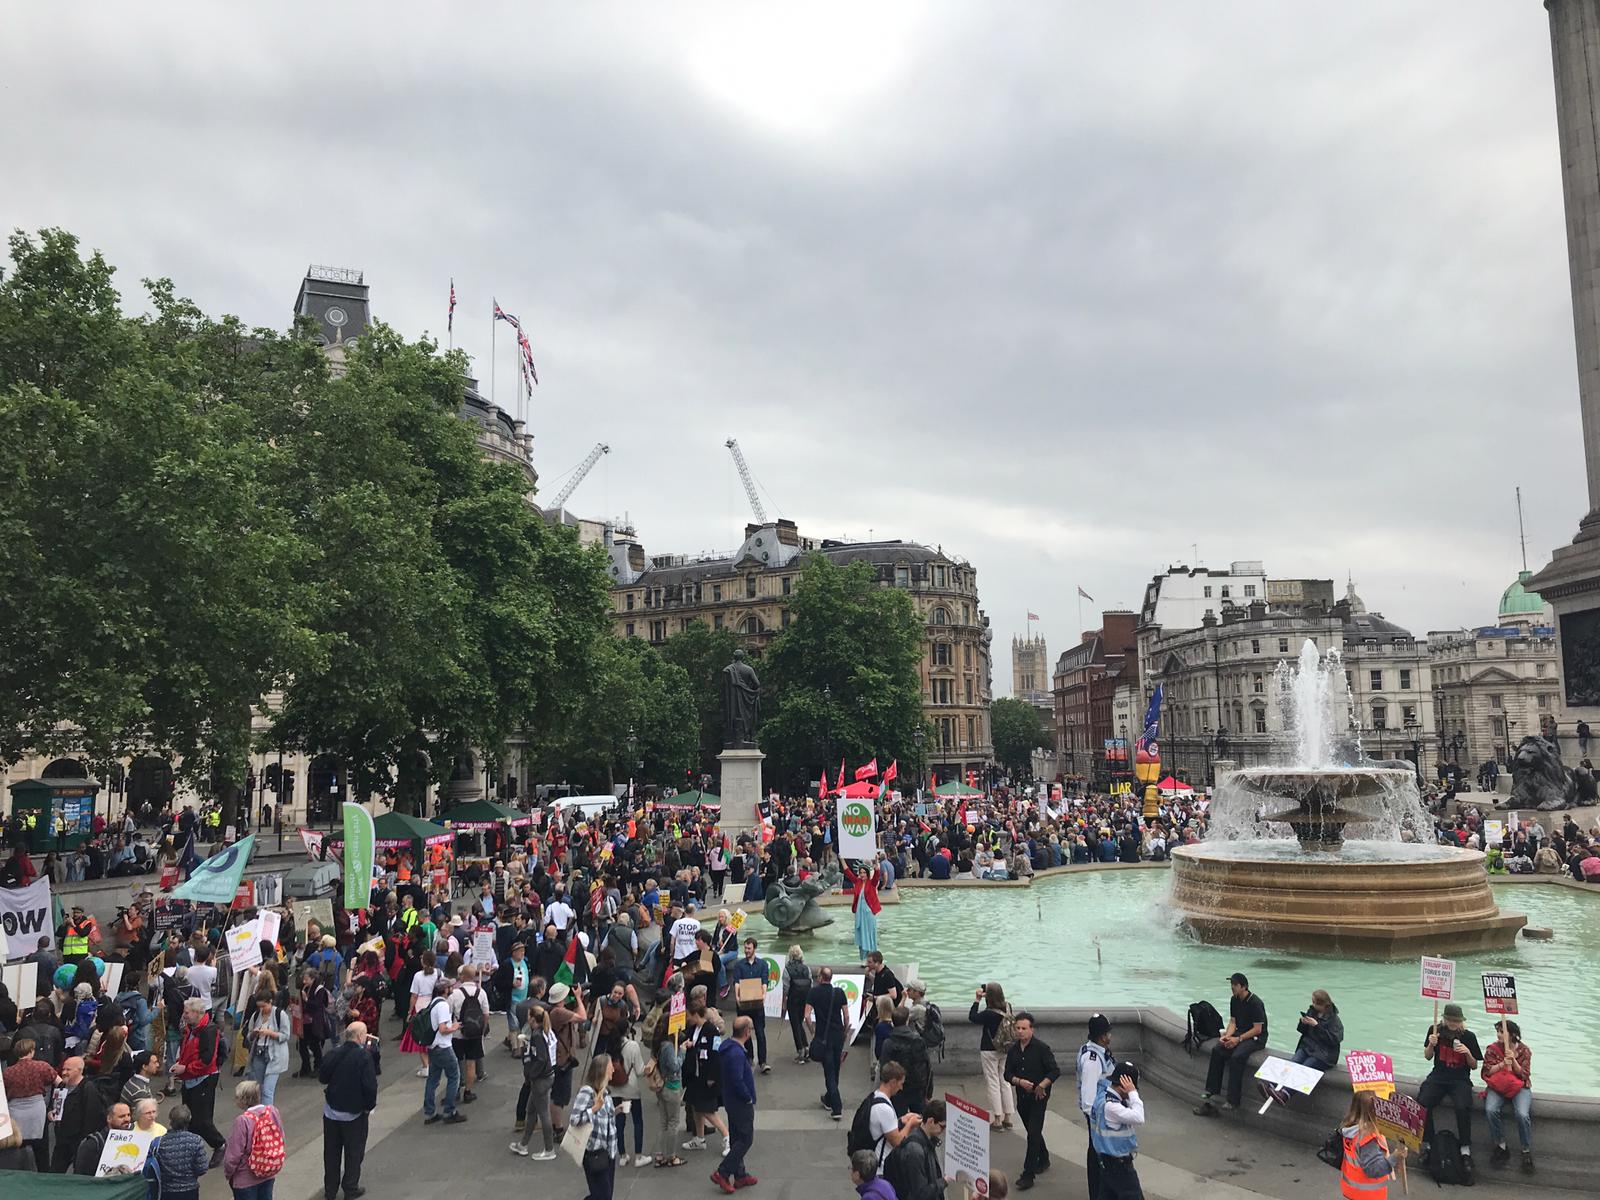 Protesters start to assemble in Trafalgar Square.